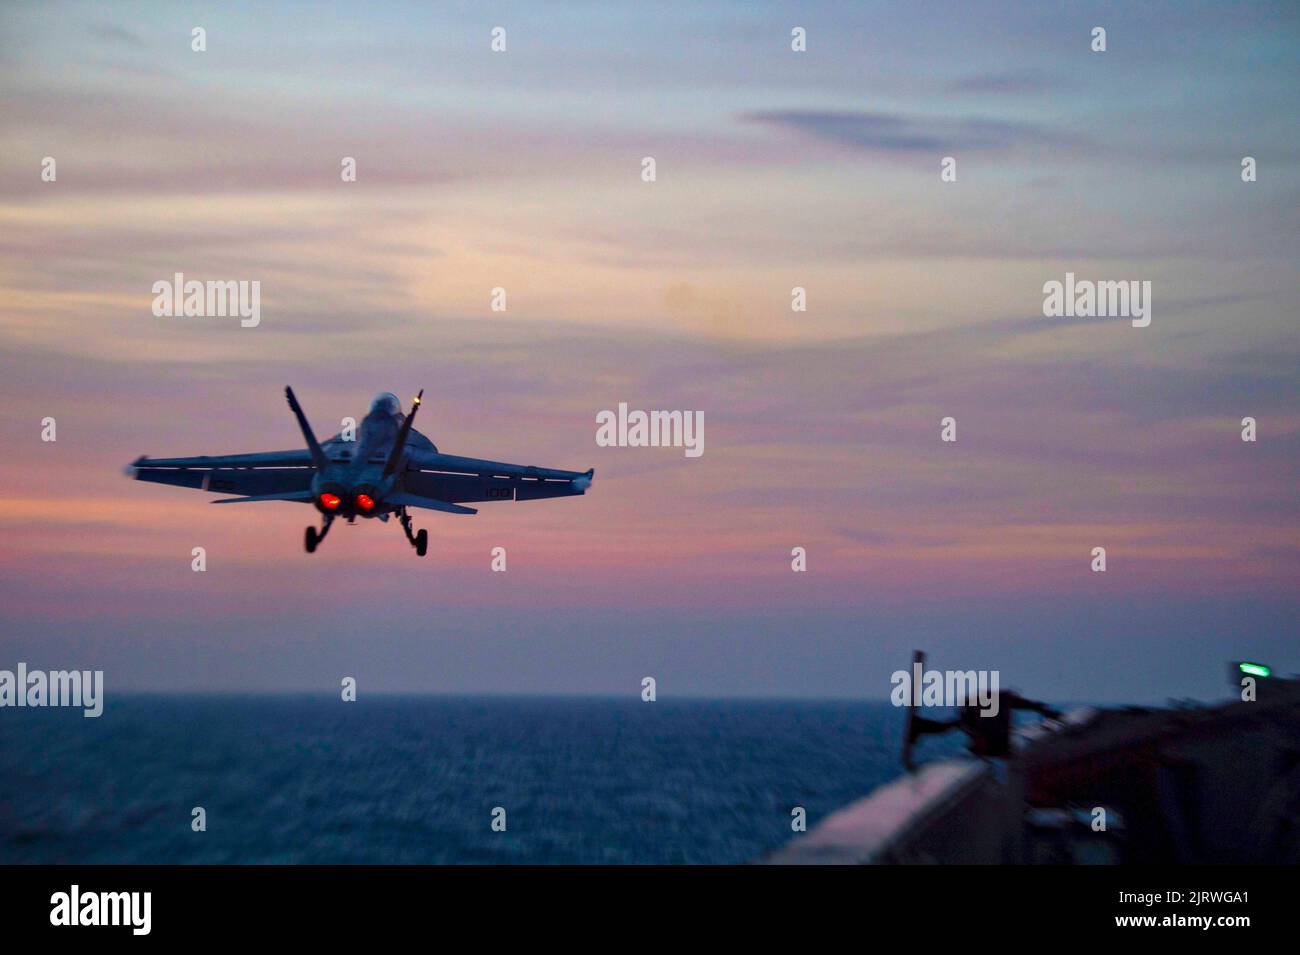 Palma, Spain. 24th Aug, 2022. A U.S. Navy F/A-18F Super Hornet fighter aircraft, attached to the Red Rippers of Strike Fighter Squadron 11 launches at sunset from the flight deck of the Nimitz-class aircraft carrier USS Harry S. Truman during NATO operations, August 24, 2022 off the coast of Mallorca, Spain. Credit: MC3 Jack Hoppe/U.S. Navy/Alamy Live News Stock Photo